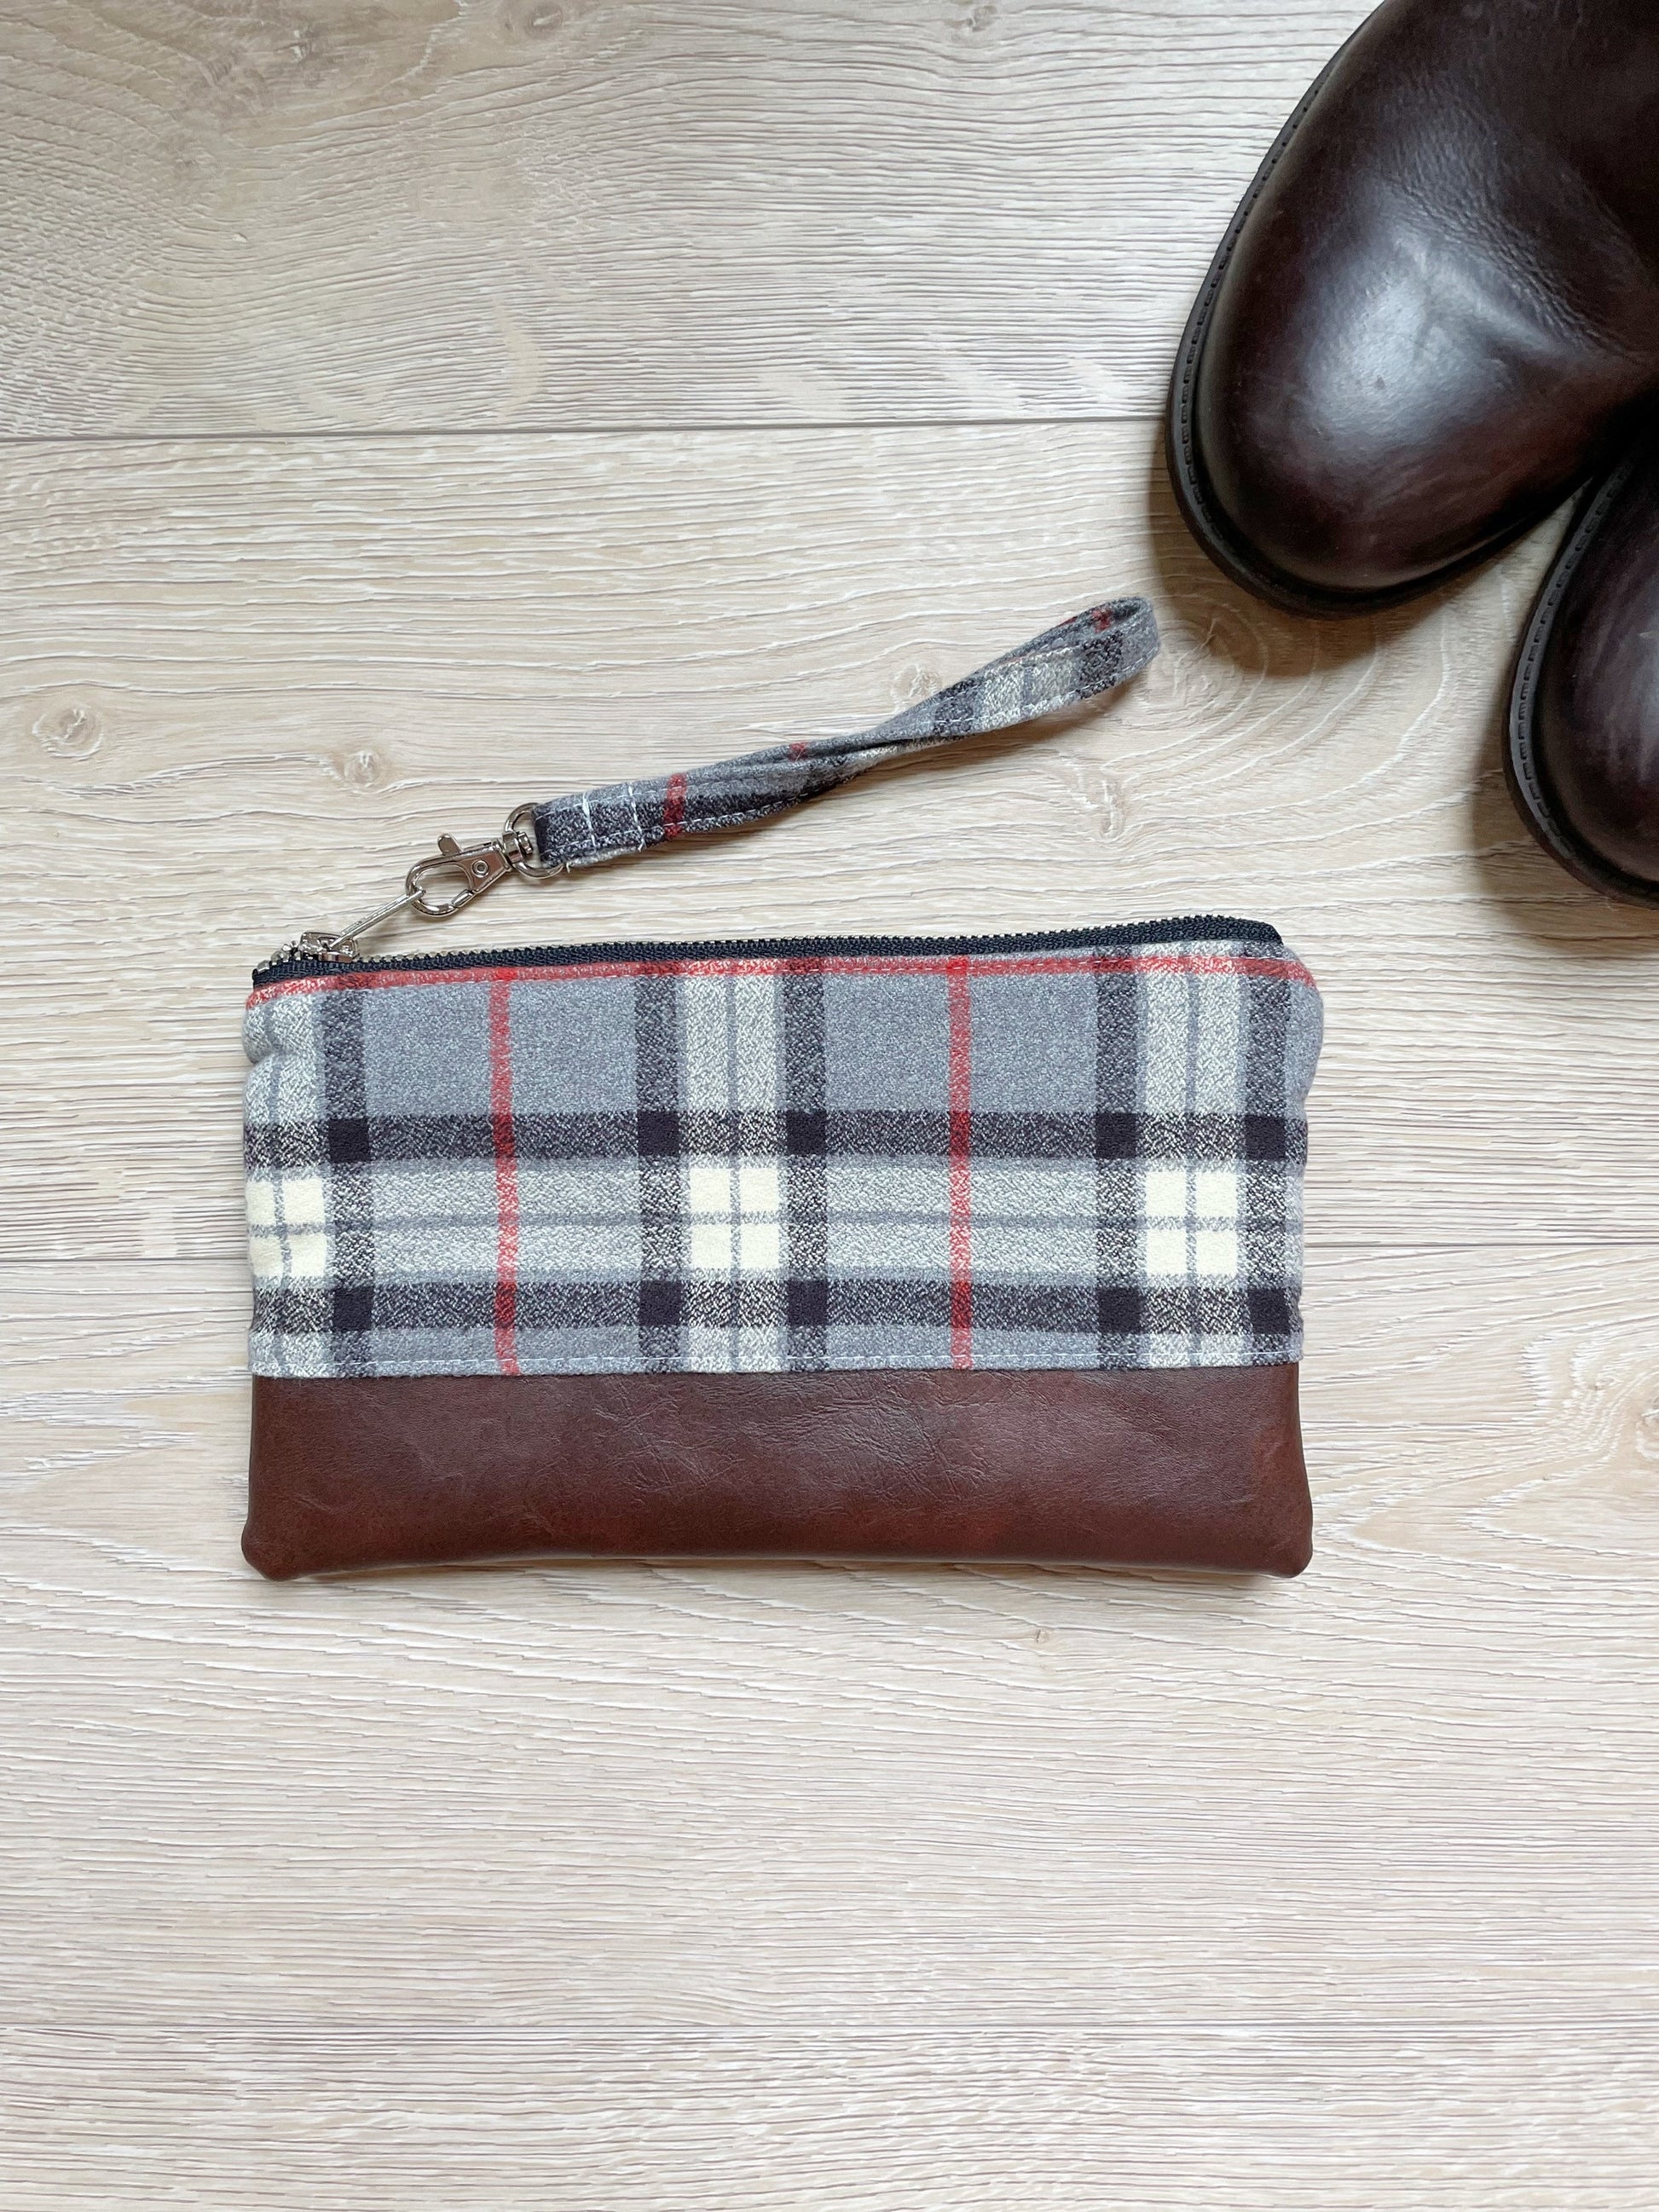 Black gray red and white flannel wristlet with brown vinyl along the bottom. Matching wrist strap and silver zipper